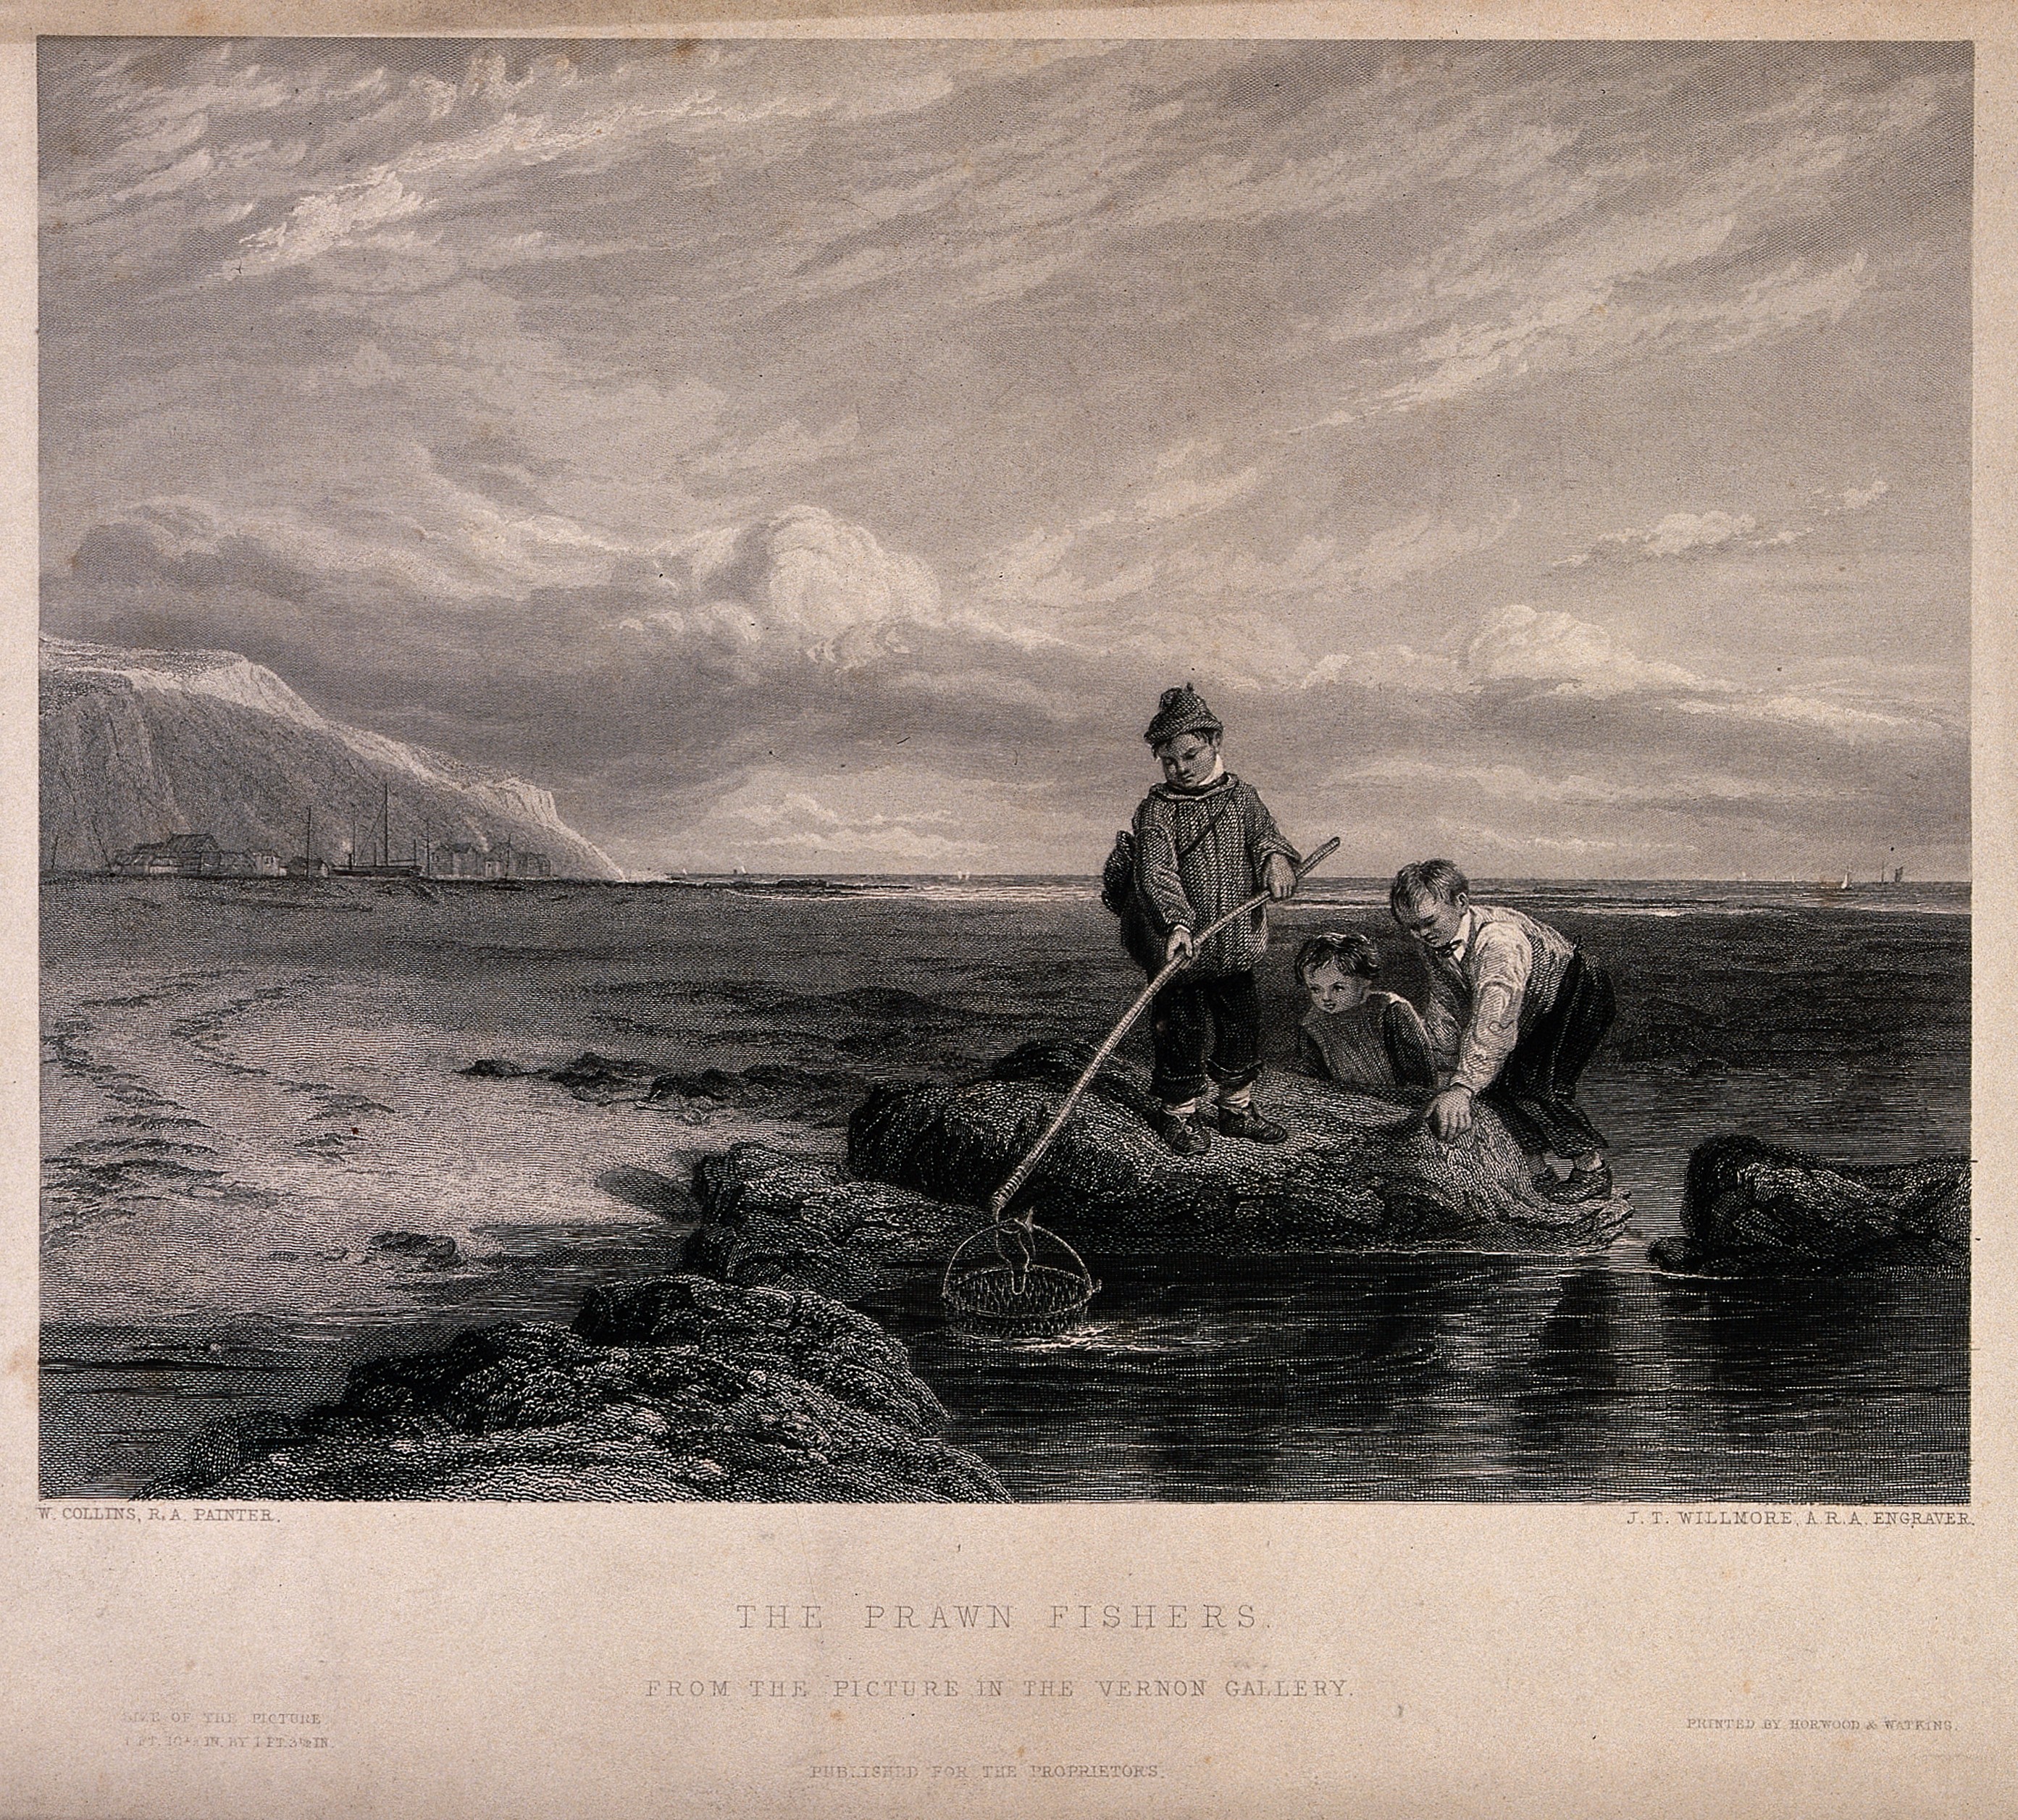 https://upload.wikimedia.org/wikipedia/commons/8/8b/Three_young_boys_are_fishing_in_rock_pools_with_a_large_net._Wellcome_V0040516.jpg